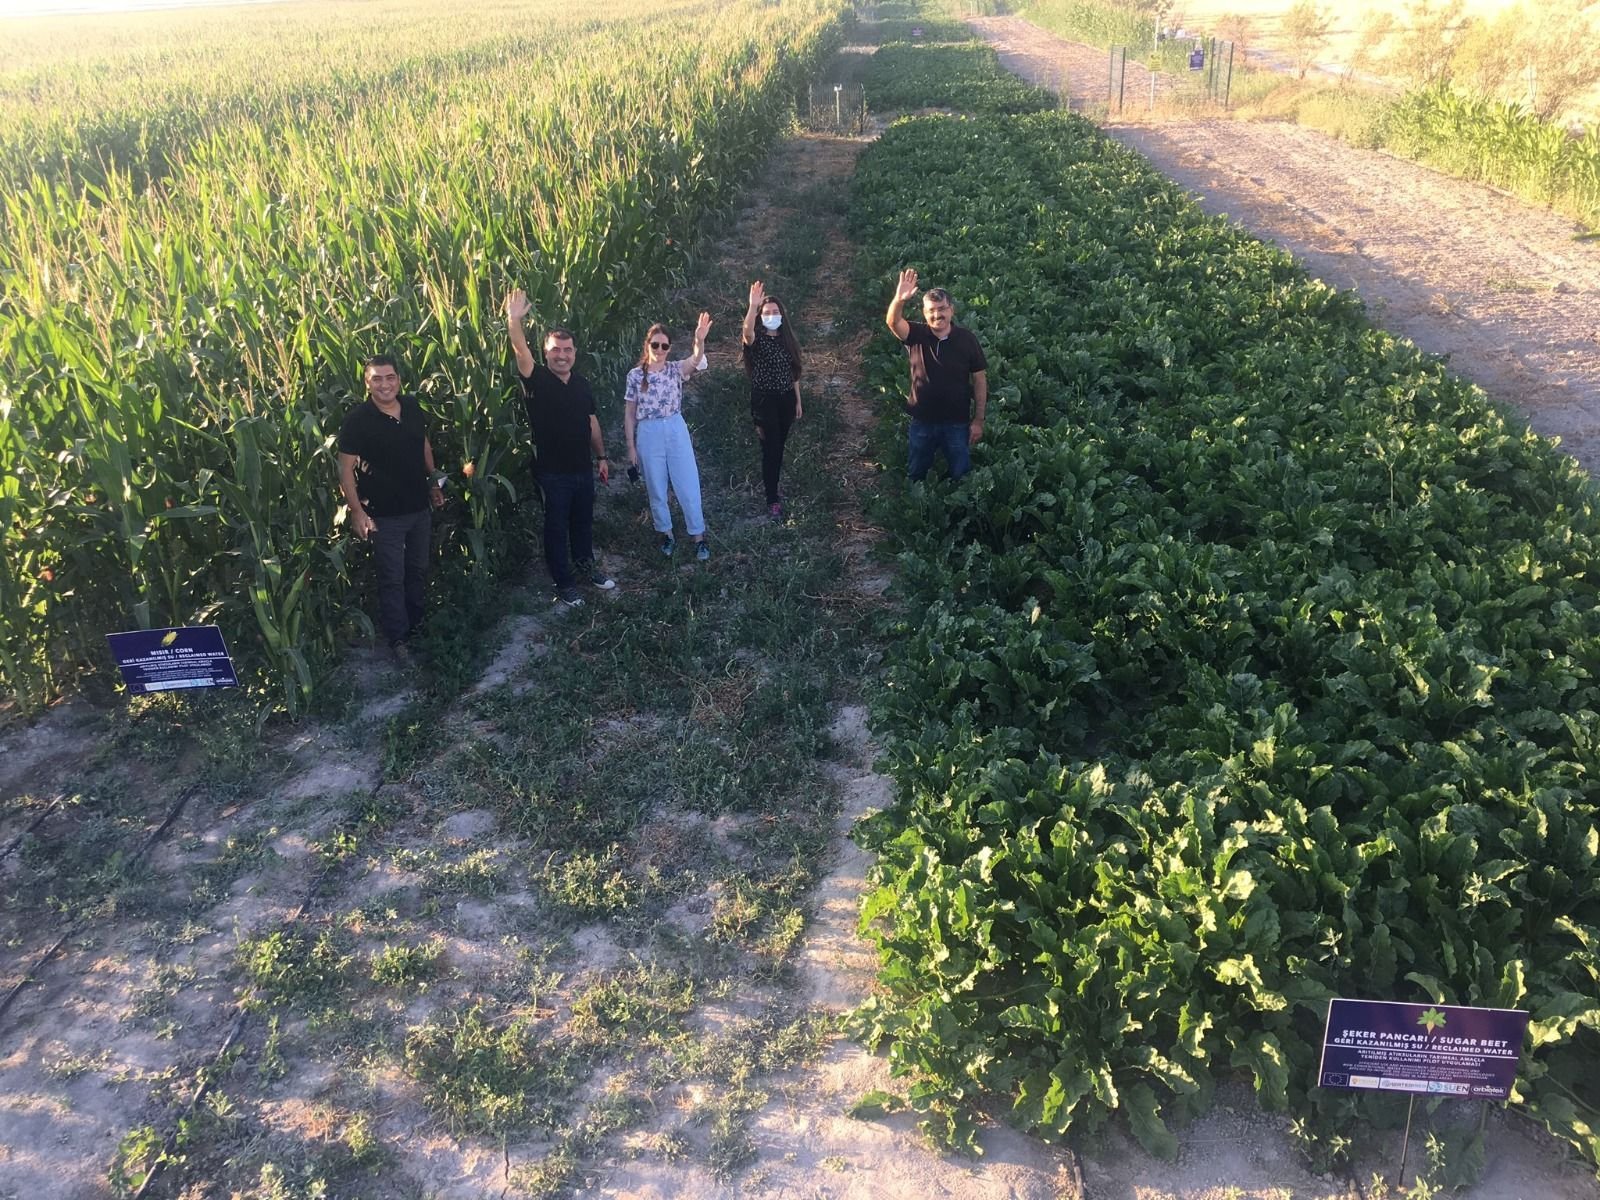 Scientists pose in a field where they study corn and beets cultivated with wastewater, in Konya, central Turkey, Jan. 4, 2022. (DHA PHOTO)